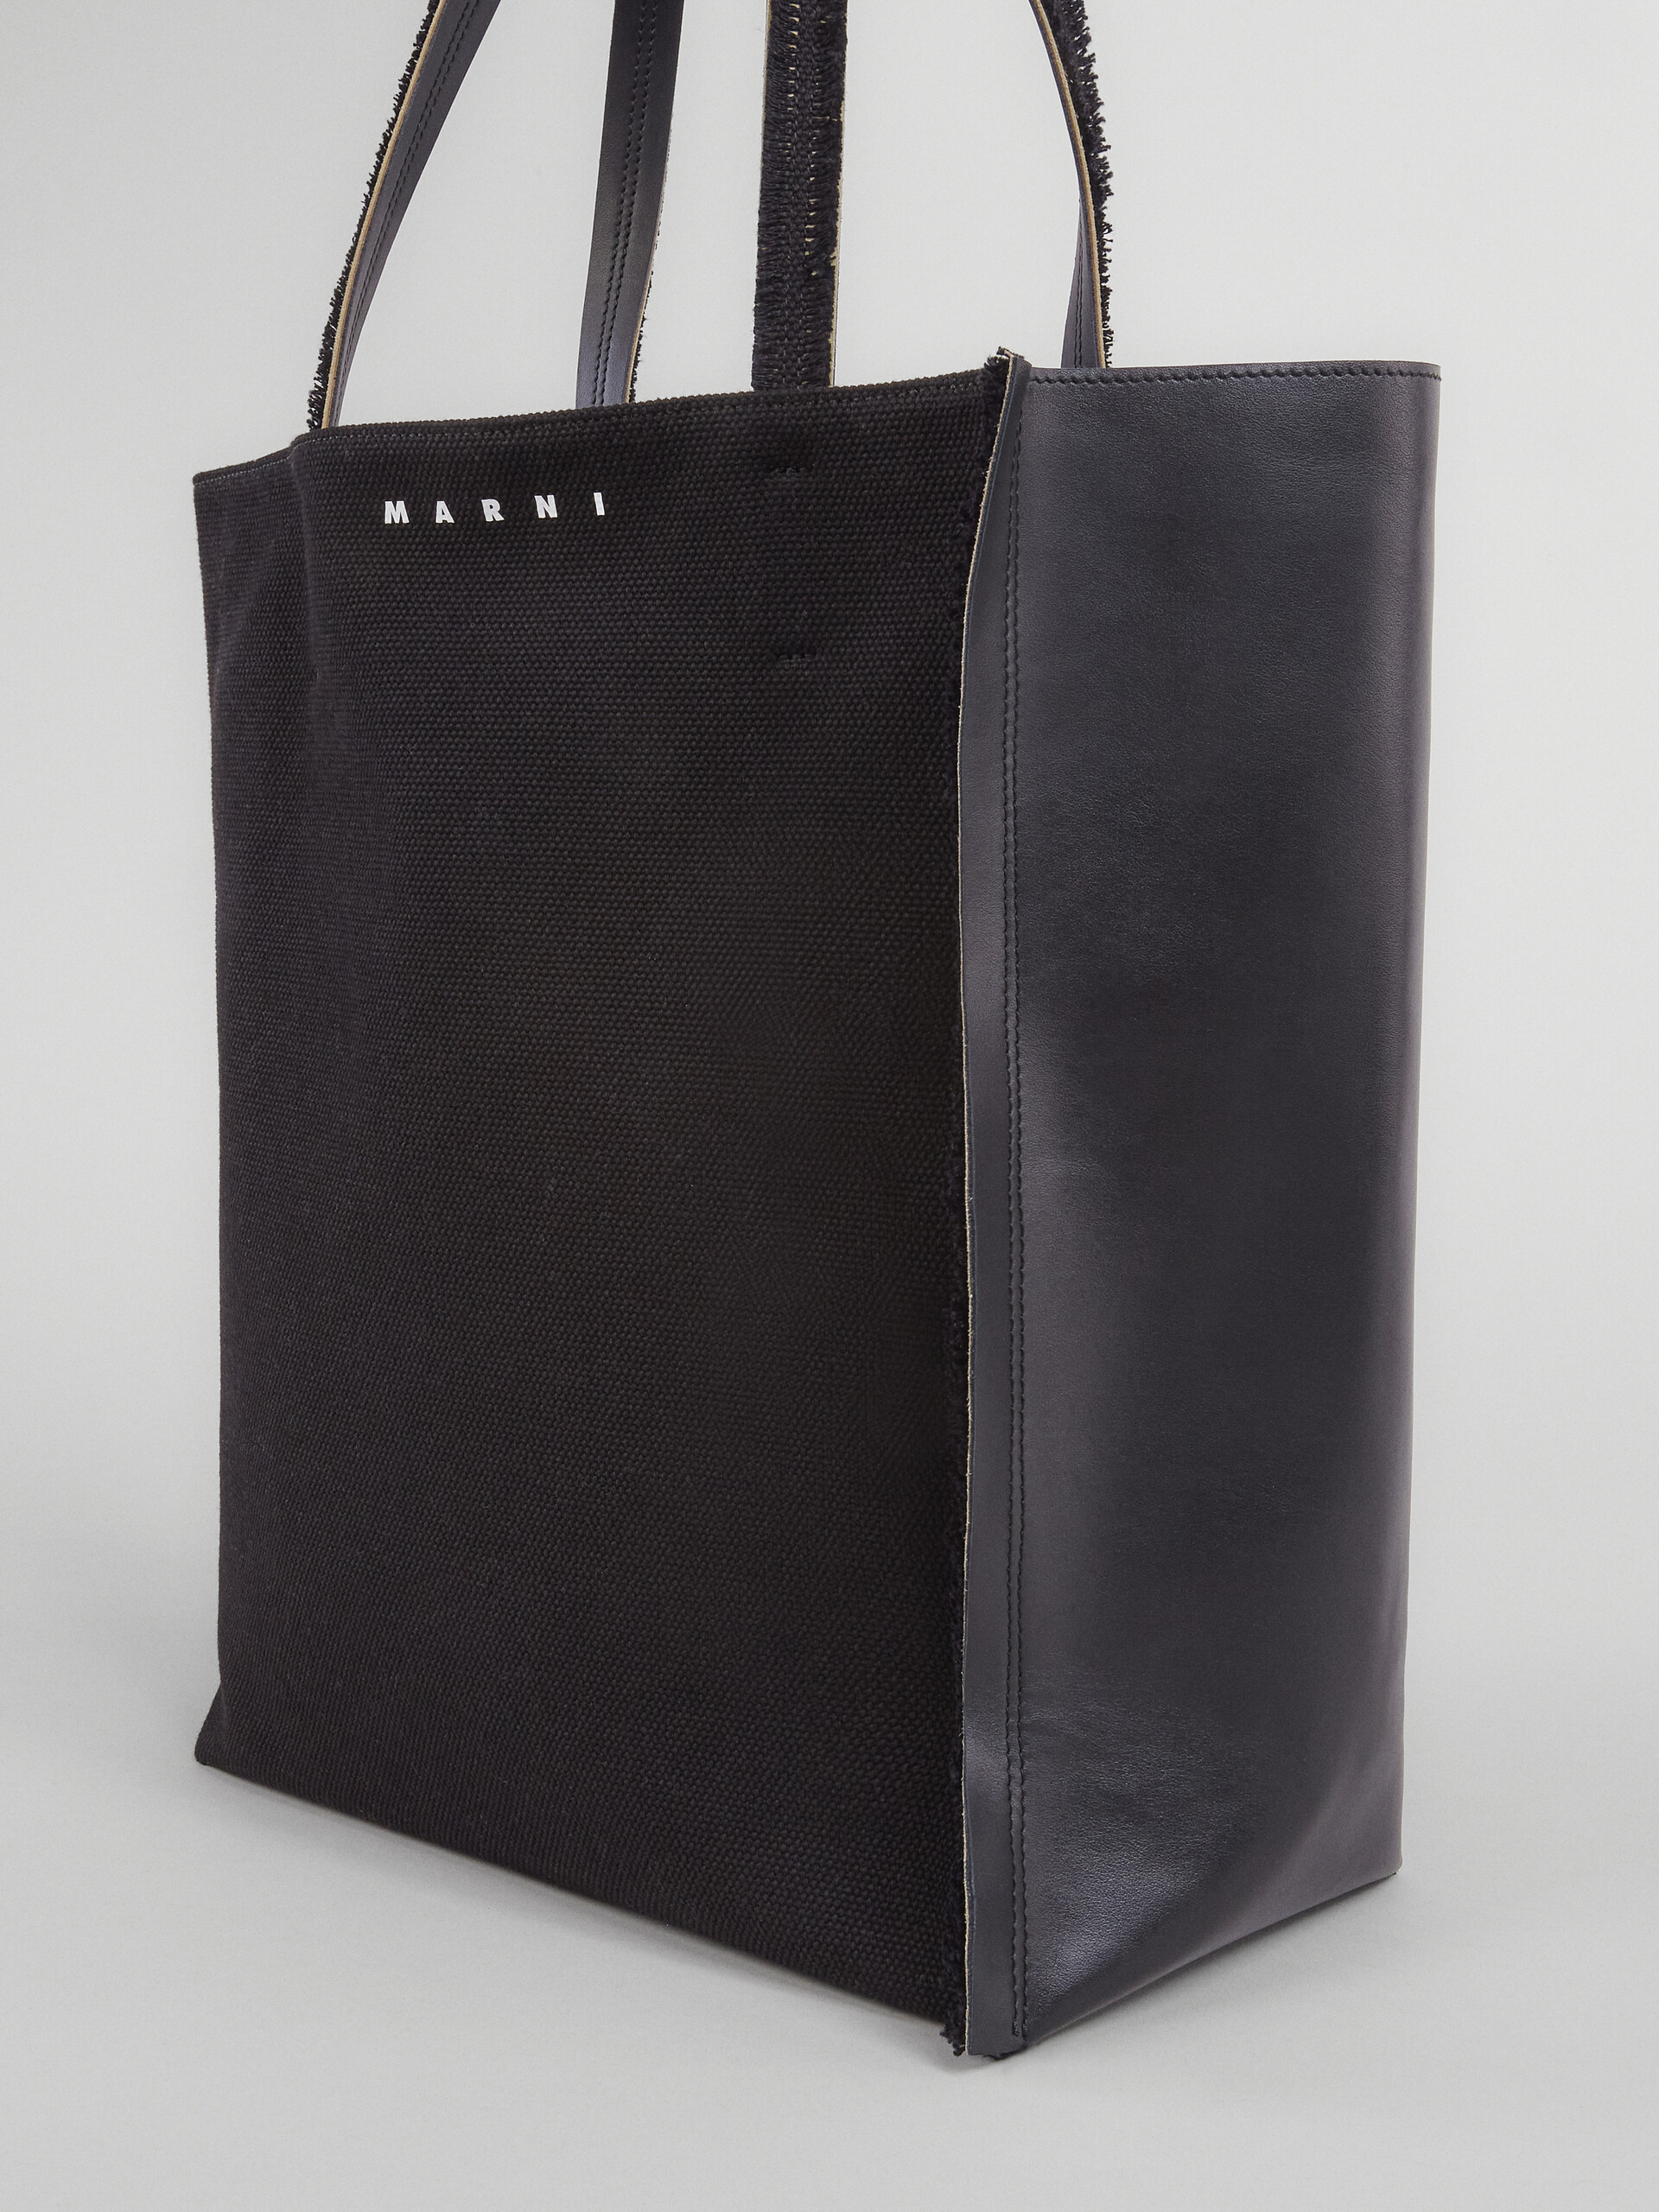 Black leather and canvas MUSEO SOFT shopping bag - Shopping Bags - Image 5